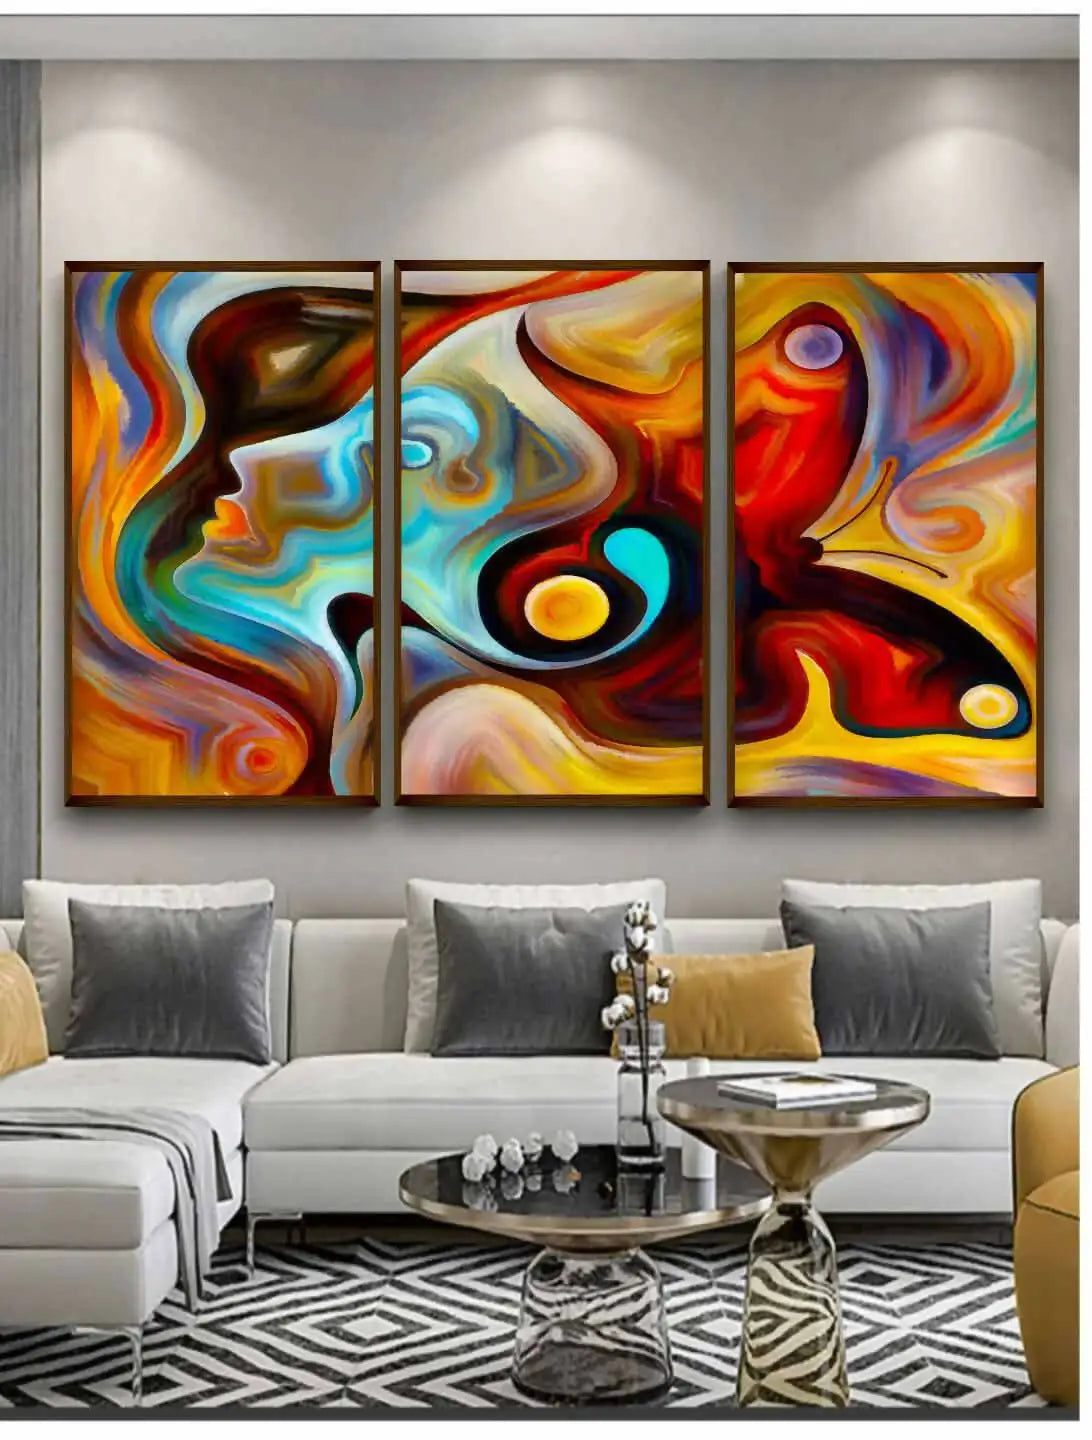 Colors of Mind Series (Multi-piece) - Wall Decor - 1